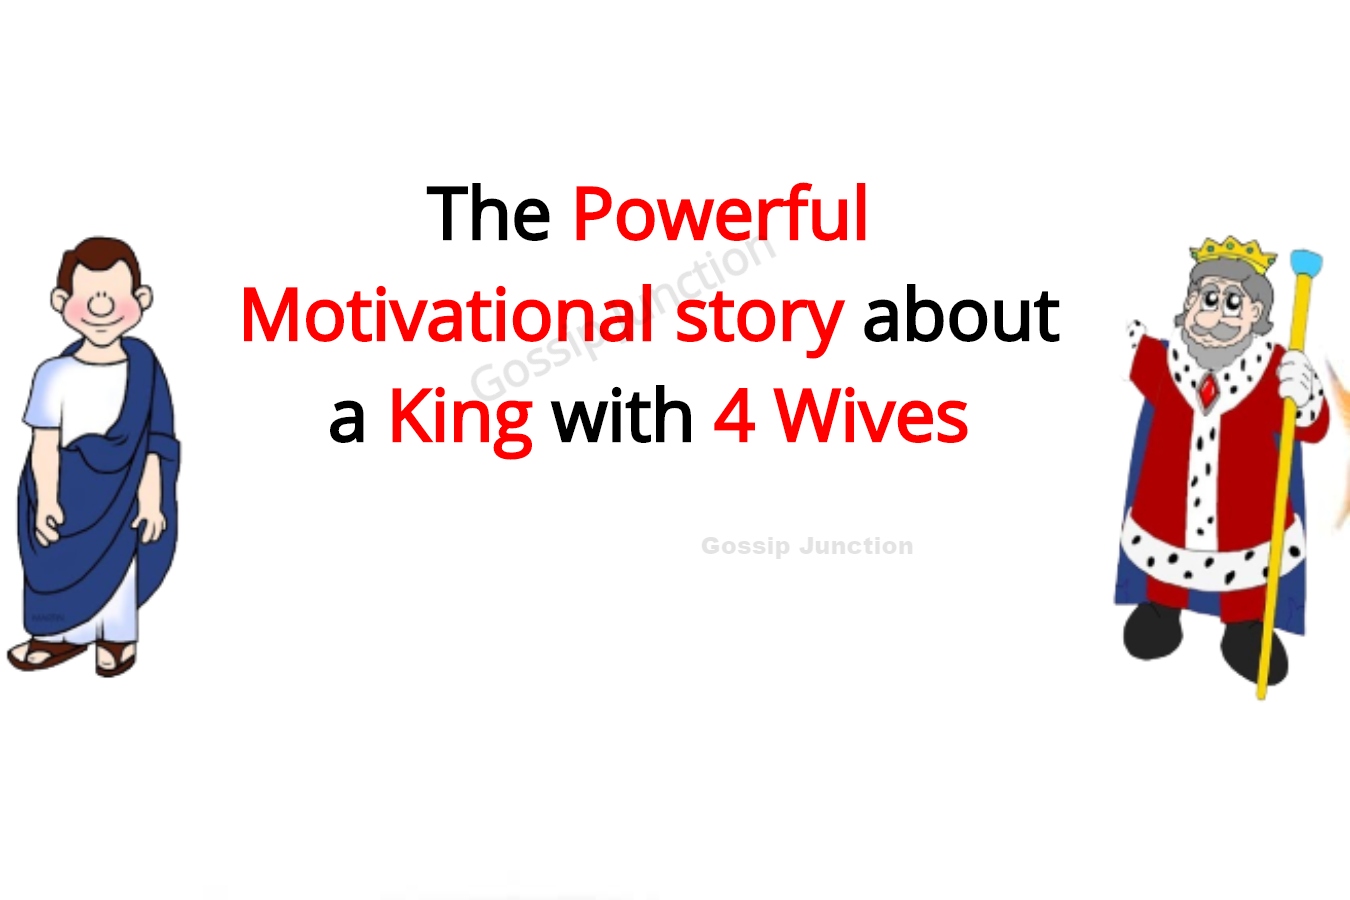 The Powerful Motivational story about a man with 4 Wives